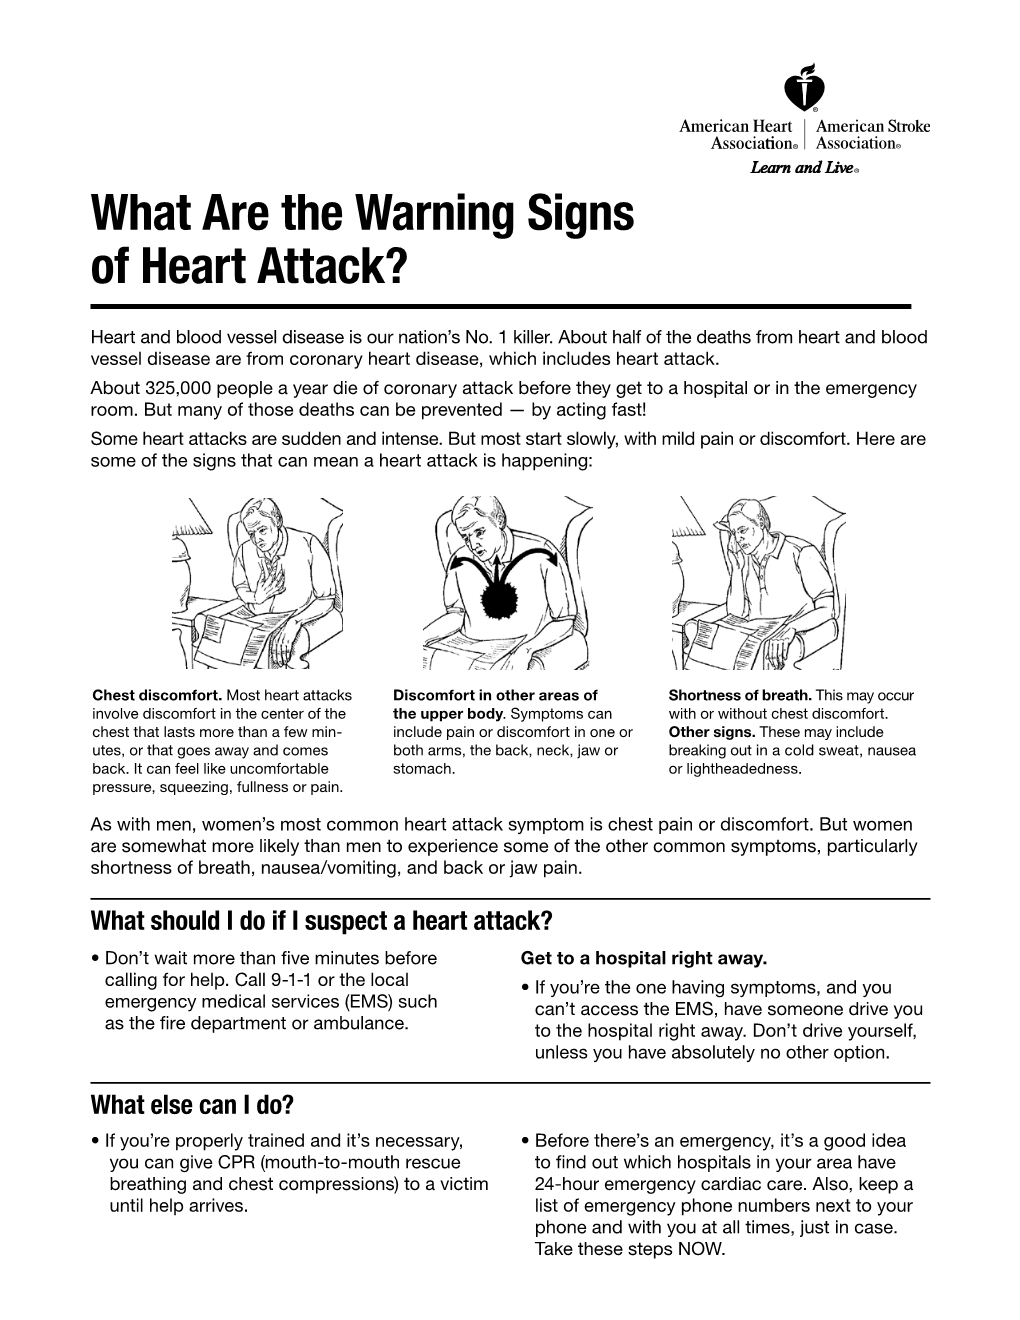 What Are the Warning Signs of Heart Attack?